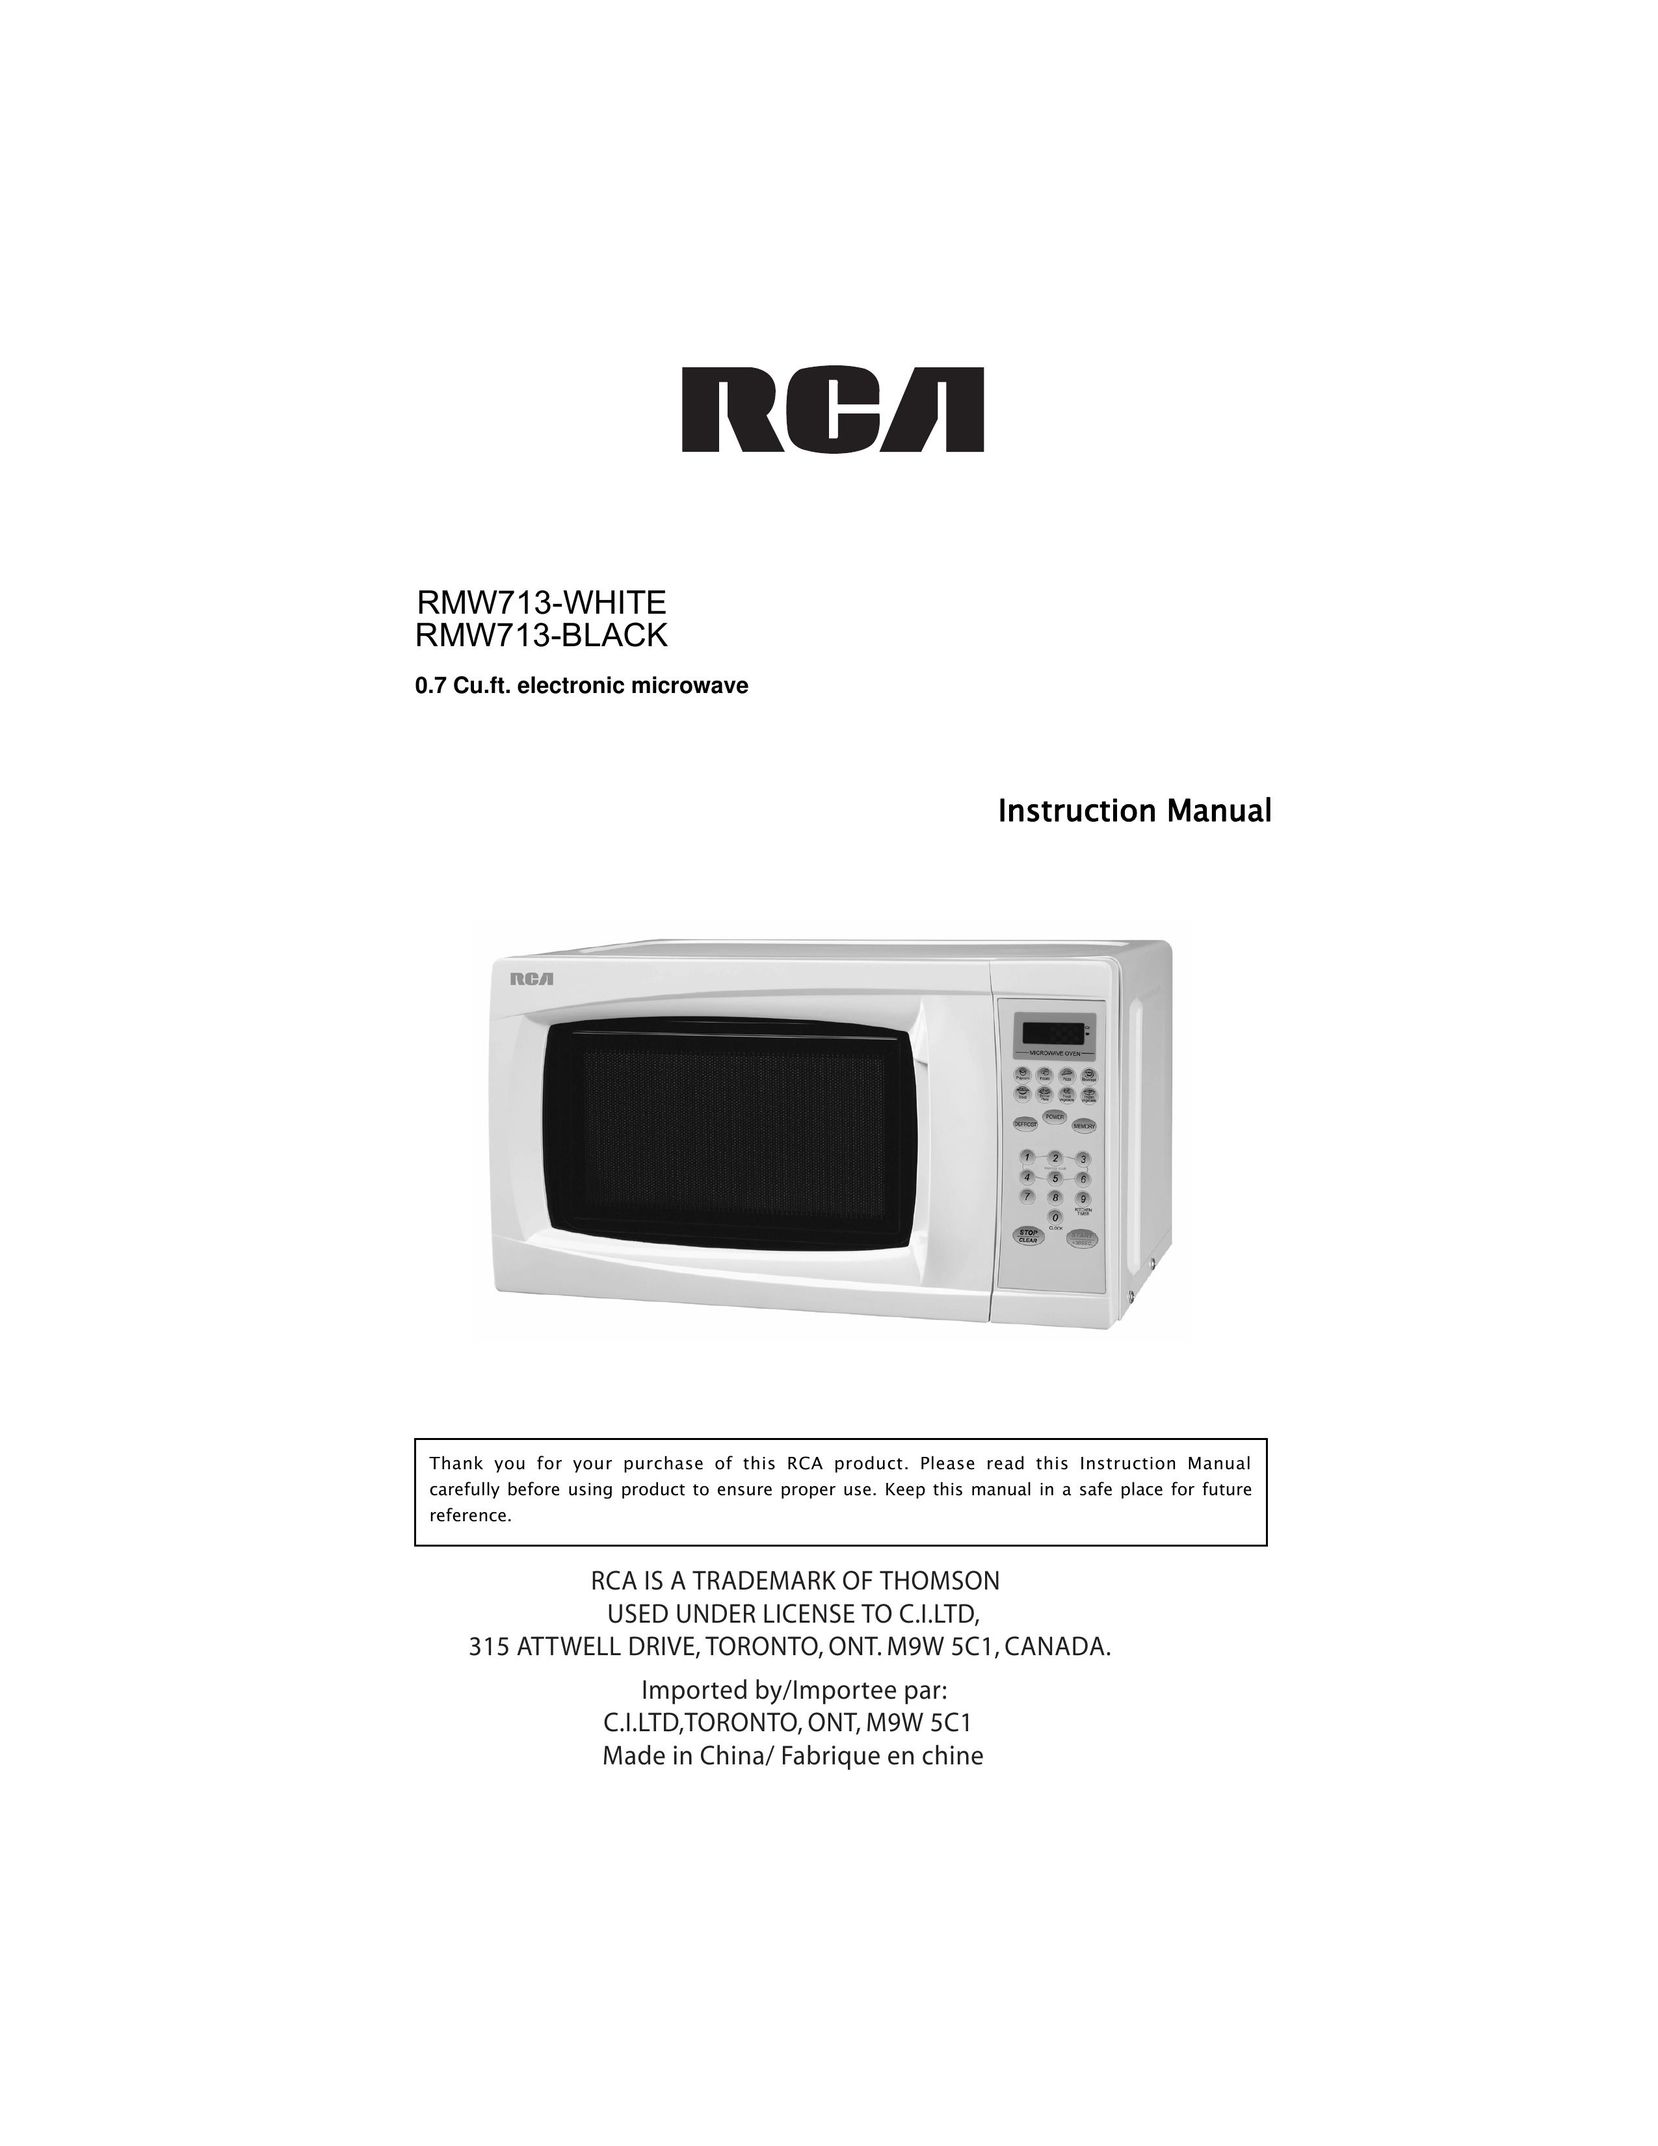 RCA RMW713-WHITE Microwave Oven User Manual